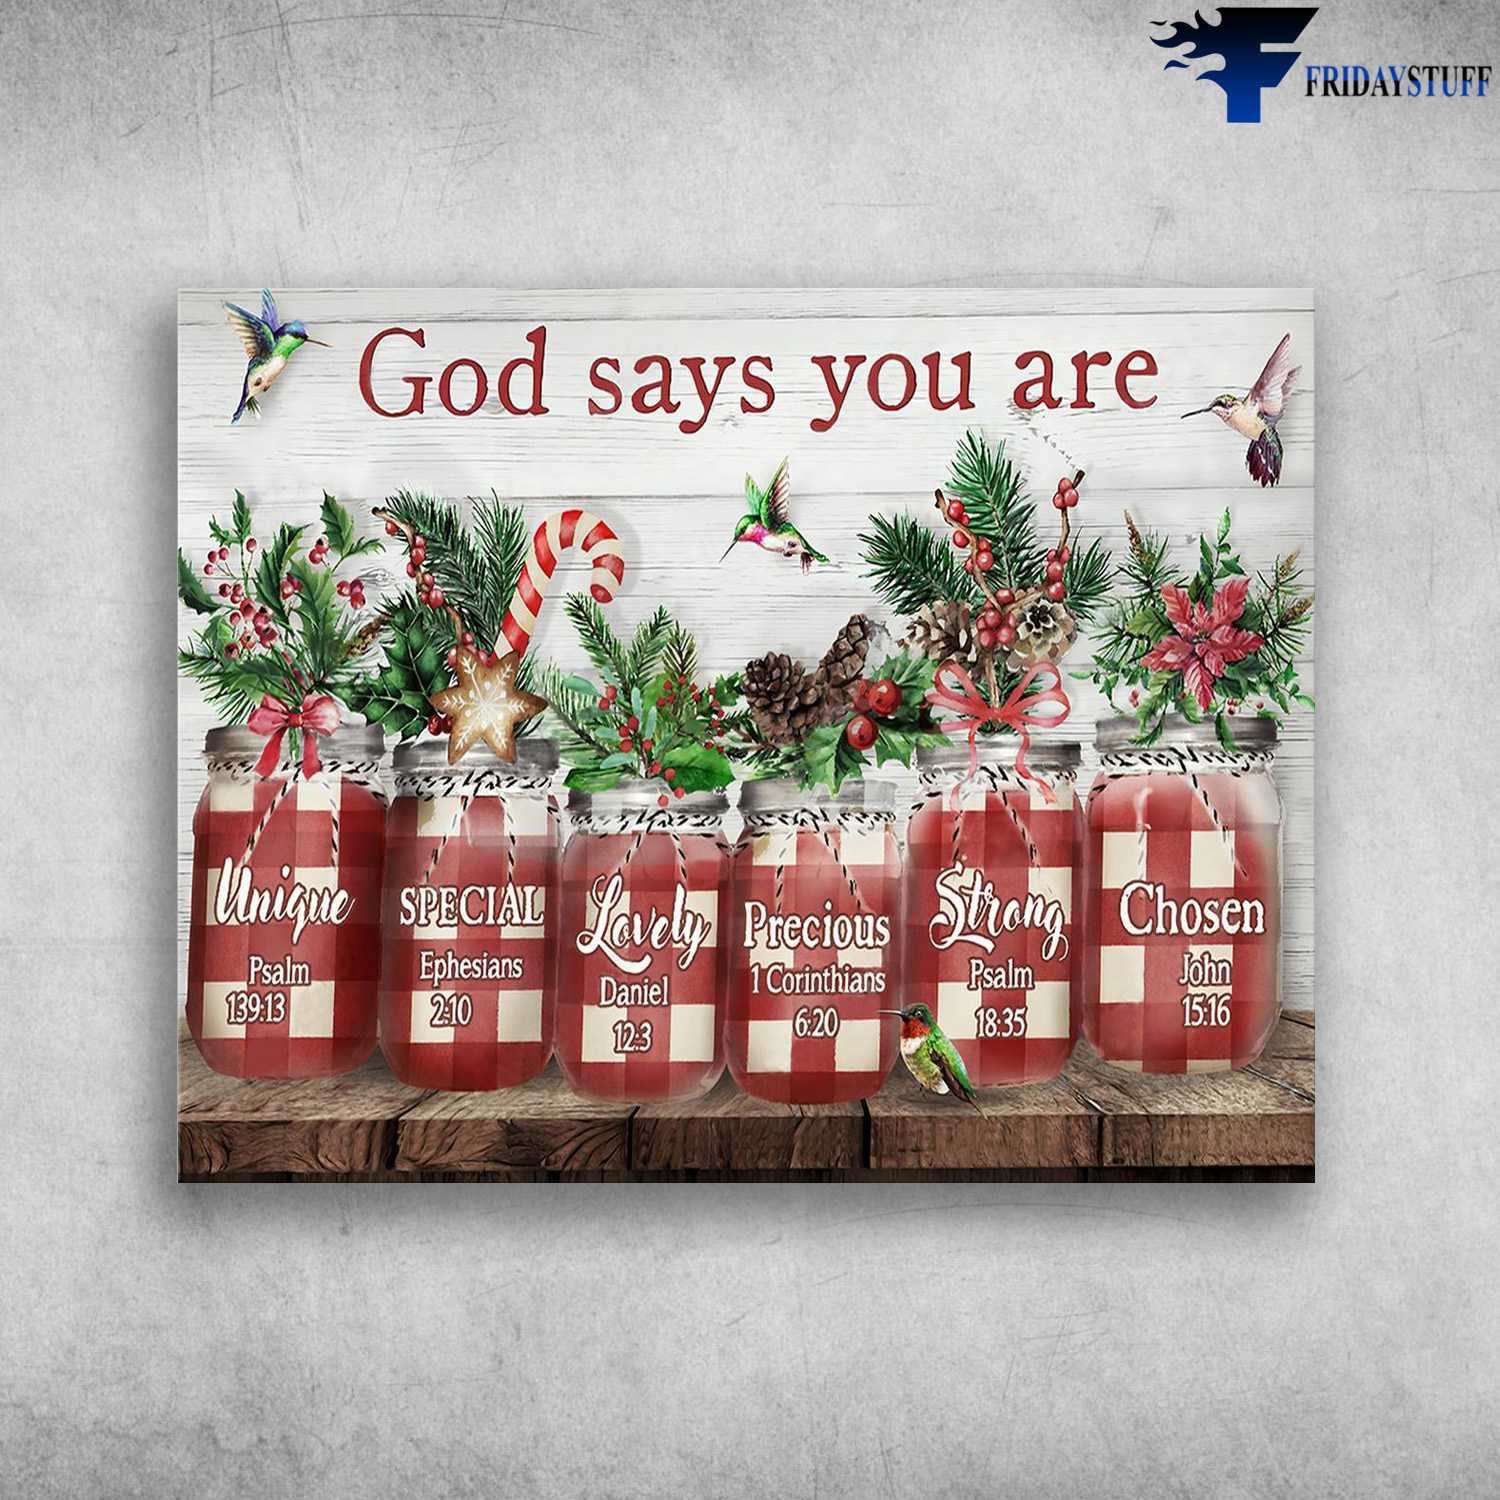 Christmas Poster, Hummingbird, God Says You Are, Unique, Special, Lovely, Precious, Strong, Chosen